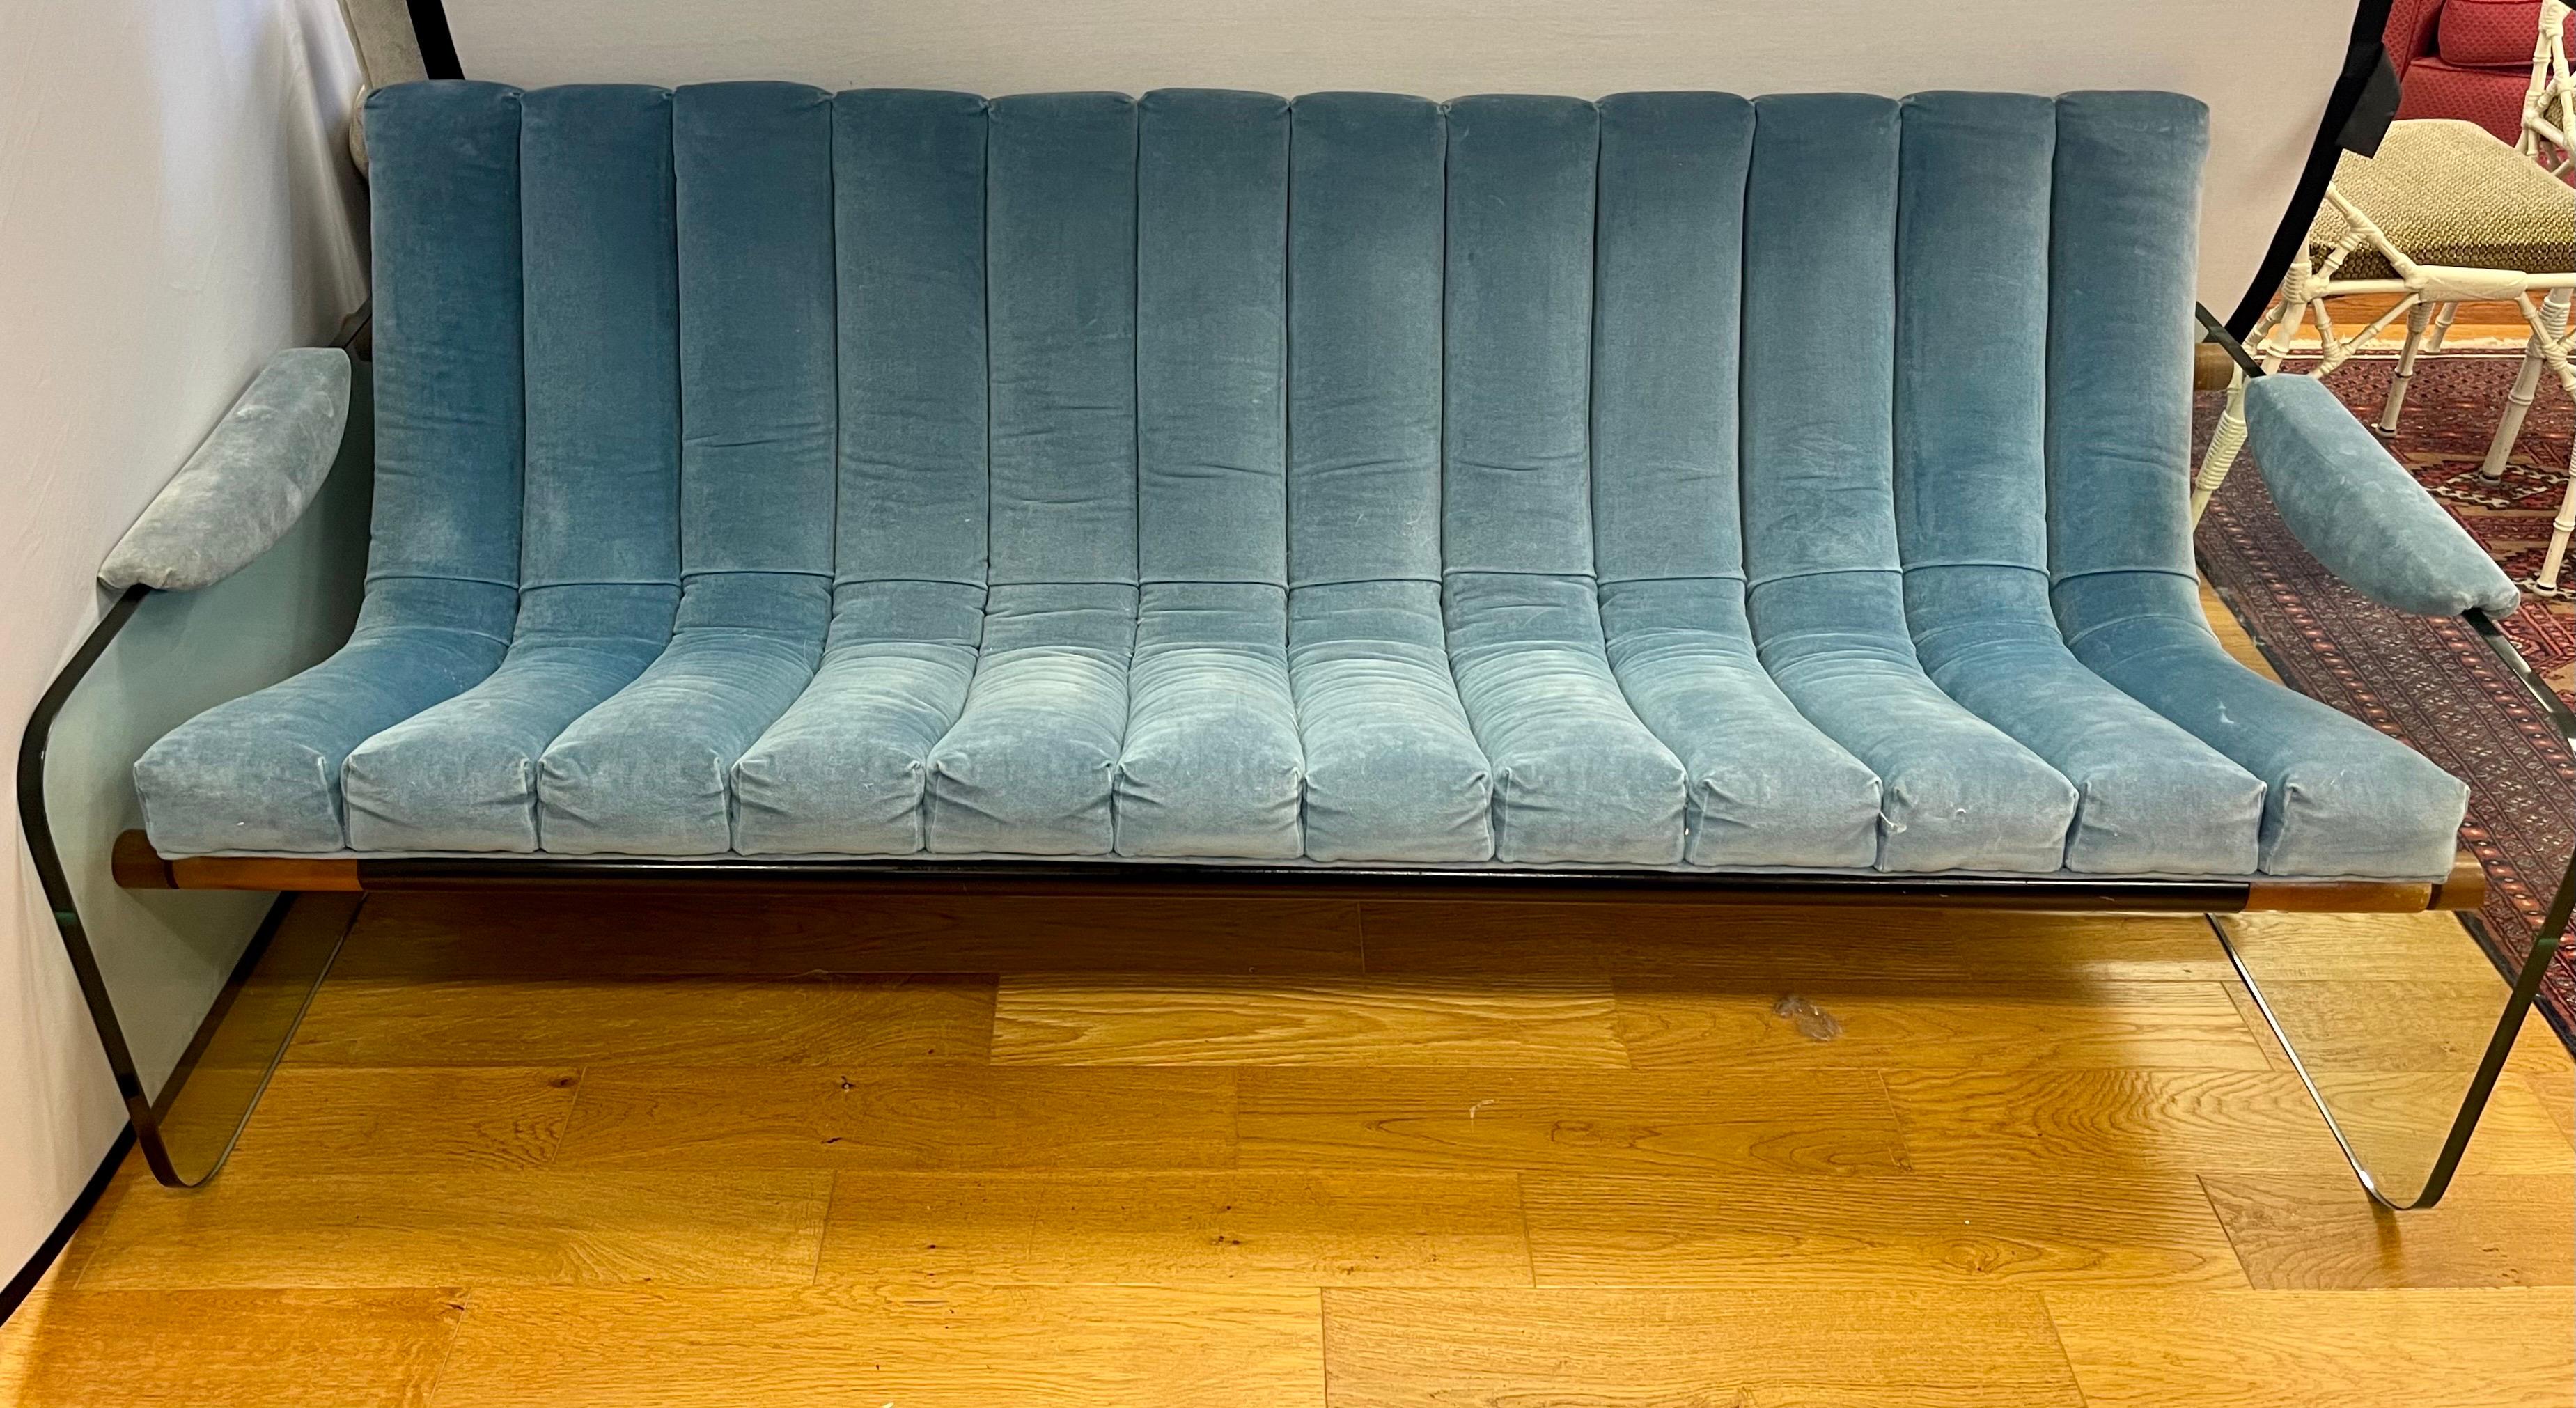 Stunning and ultra rare Fabio Lenci three seater sofa that is part of the coveted Hyaline collection. Note the piece was reupholstered five years ago in a blue ocean cotton velvet fabric which is still in good condition. It features Lenci's famed